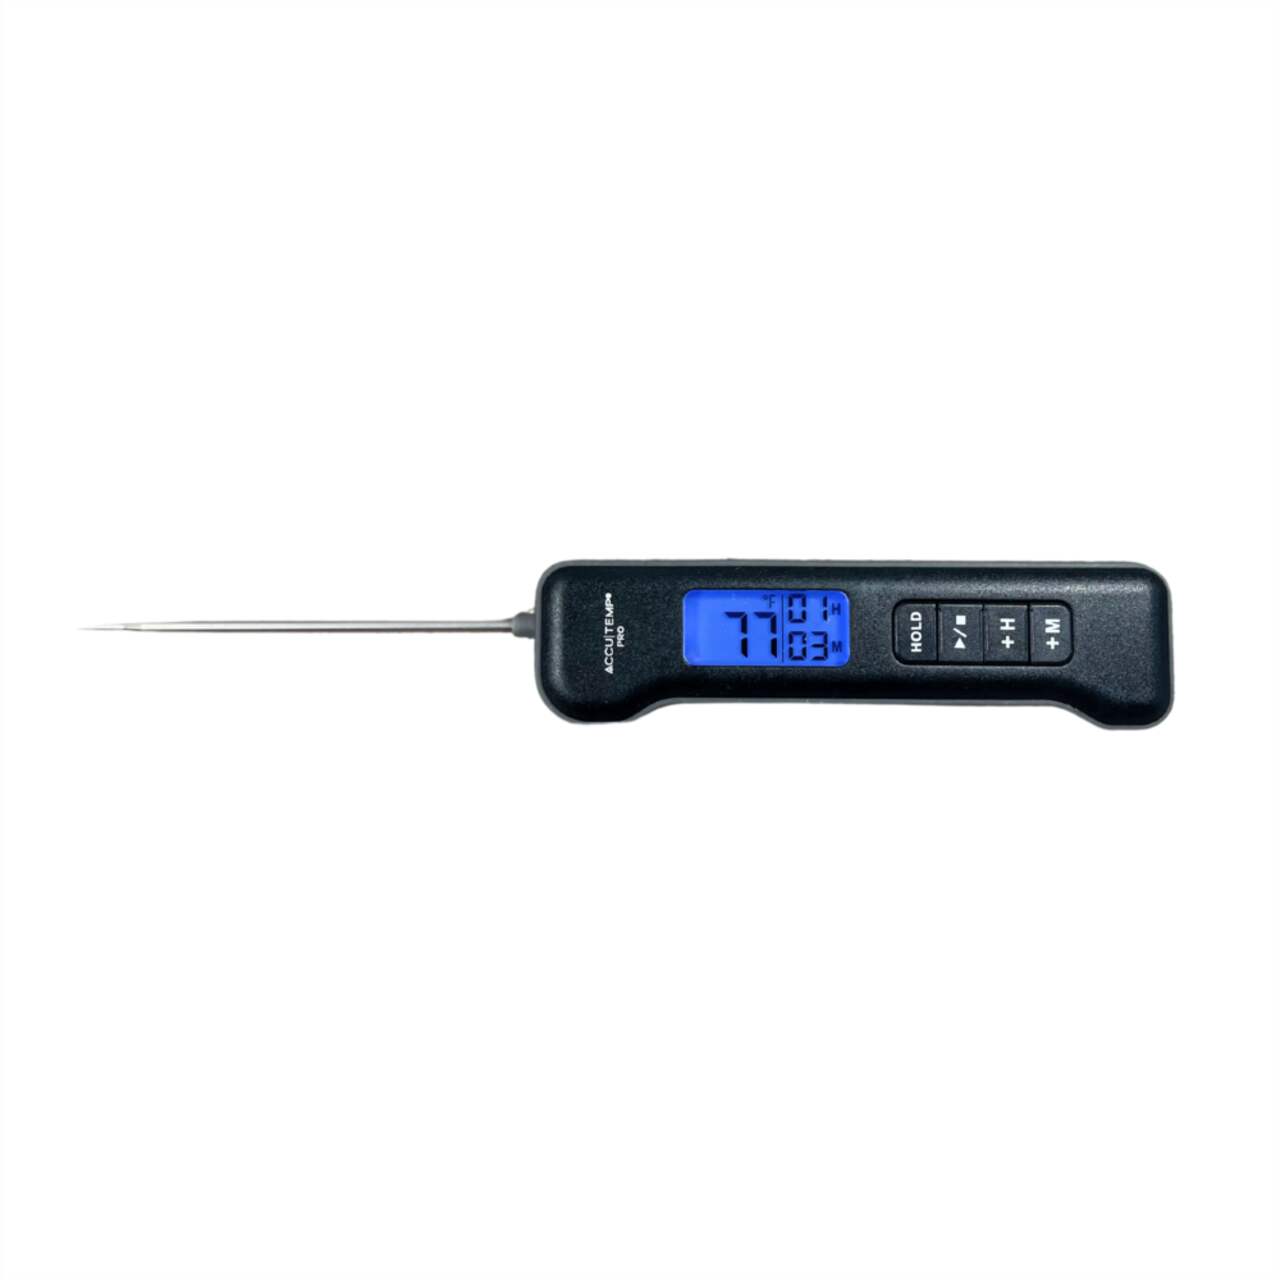 https://media-www.canadiantire.ca/product/living/kitchen/kitchen-tools-thermometers/1427122/accutemp-pro-rapid-response-thermometer-b03807f2-0d86-40e3-9622-d7c9c8d48ec0.png?imdensity=1&imwidth=1244&impolicy=mZoom